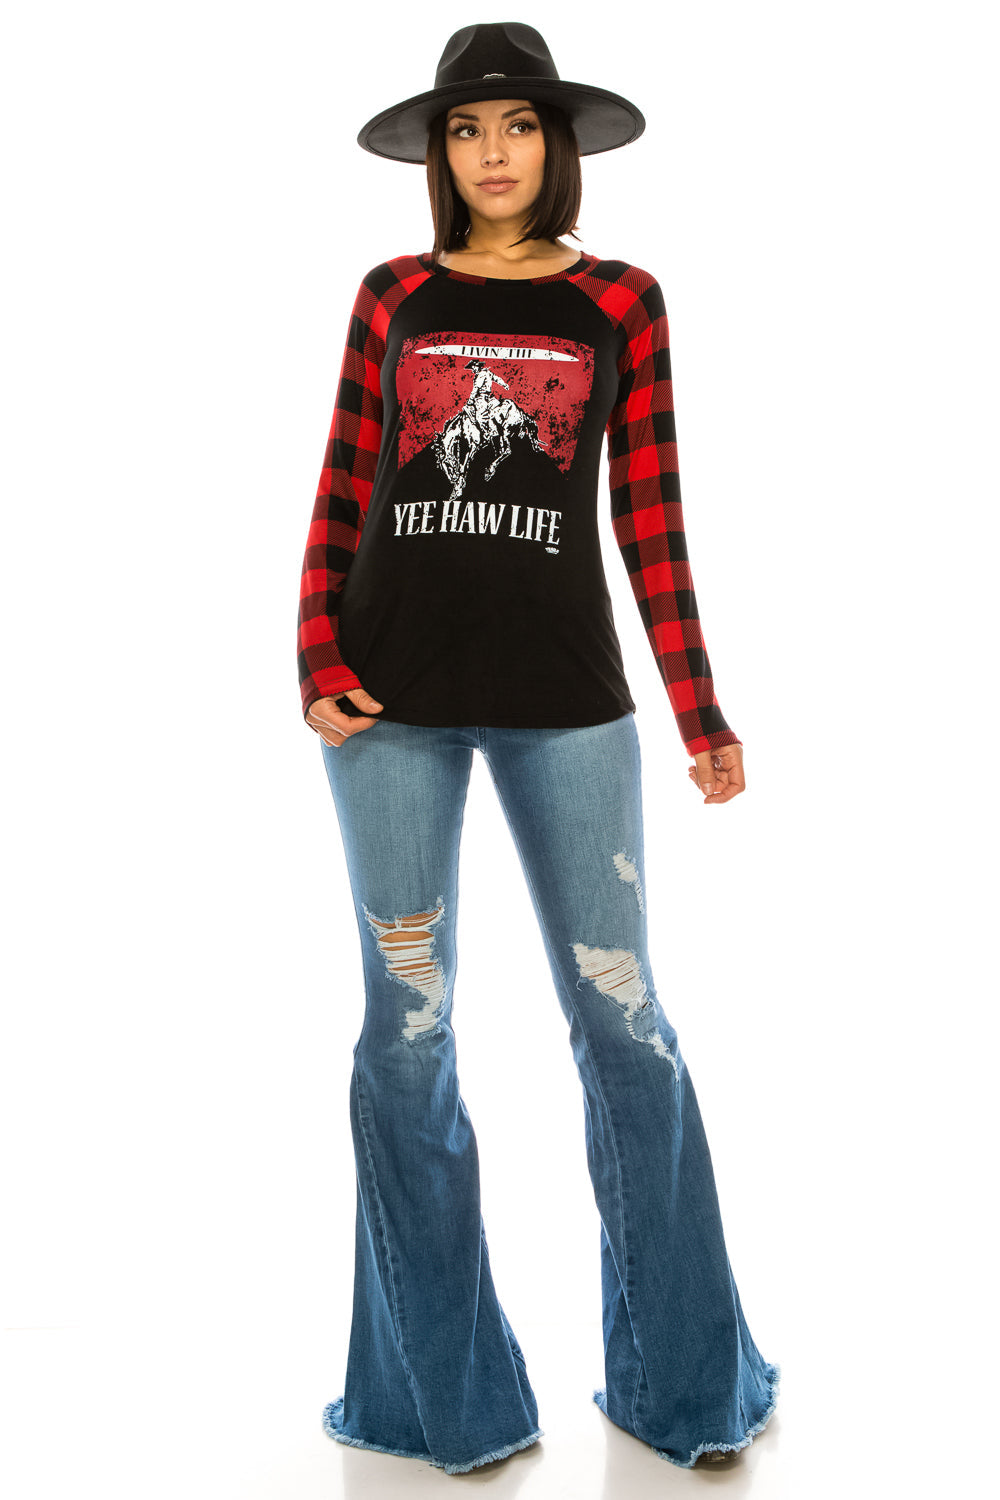 Livin the Yeehaw Life Raglan Shirt - ATTITUDE, bent, beth, bound, bronc, bronc rider, buffalo plaid, COUNTRY, COWGIRL, GIRL, haw, hell, HOWDY, plaid, PLUS, rip, RODEO, SIZE, smooth, SUMMER, TANK, tennessee, TOP, TOPO, WESTERN, yee, yeehaw -  - Baha Ranch Western Wear